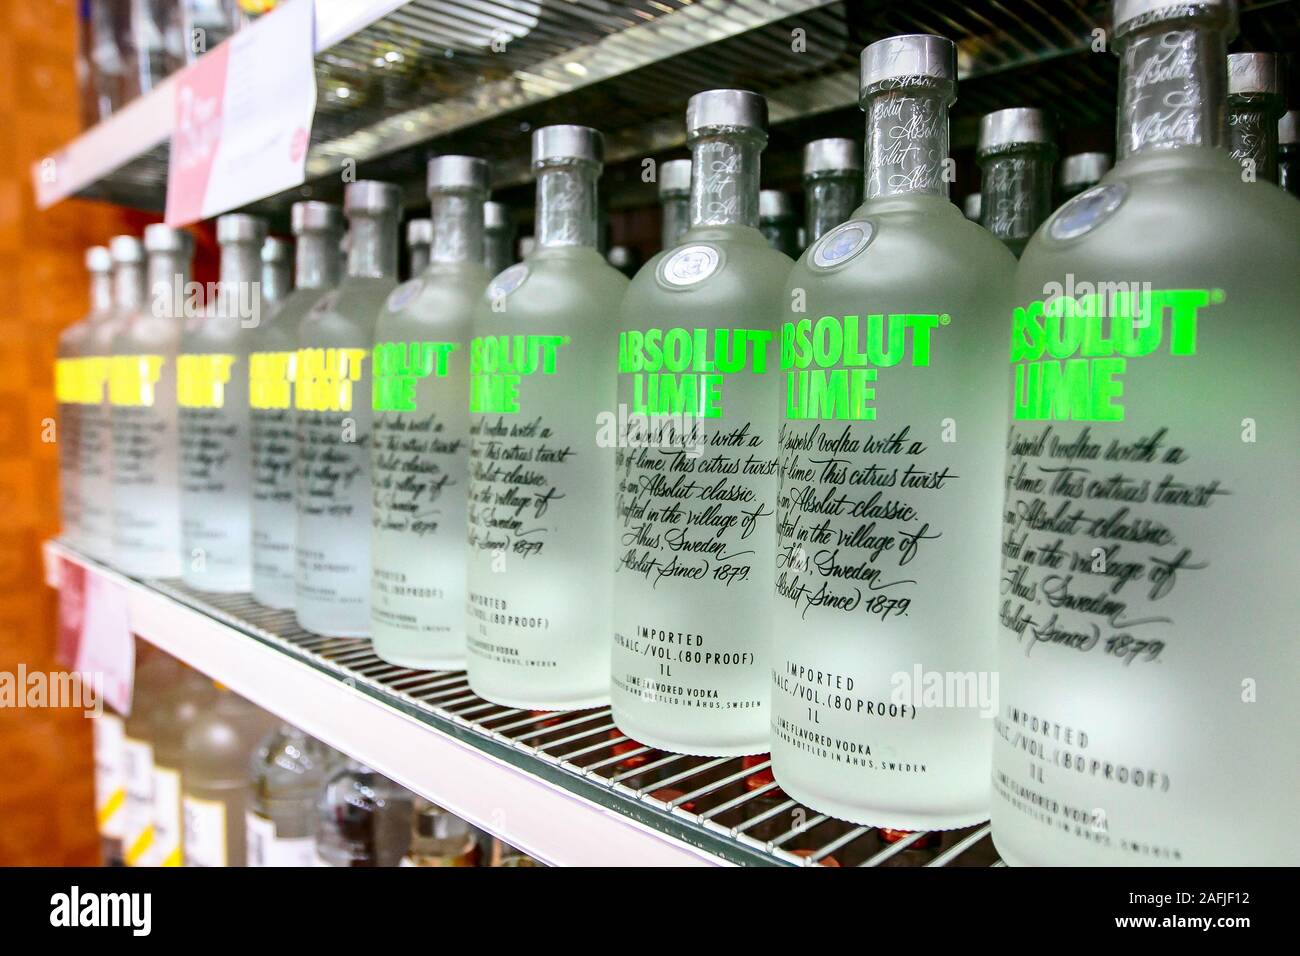 Aruba, 12/2/2019: Bottles of Absolut Lime and Absolute Citron vodka stand on a shelf in a liquor store. Stock Photo